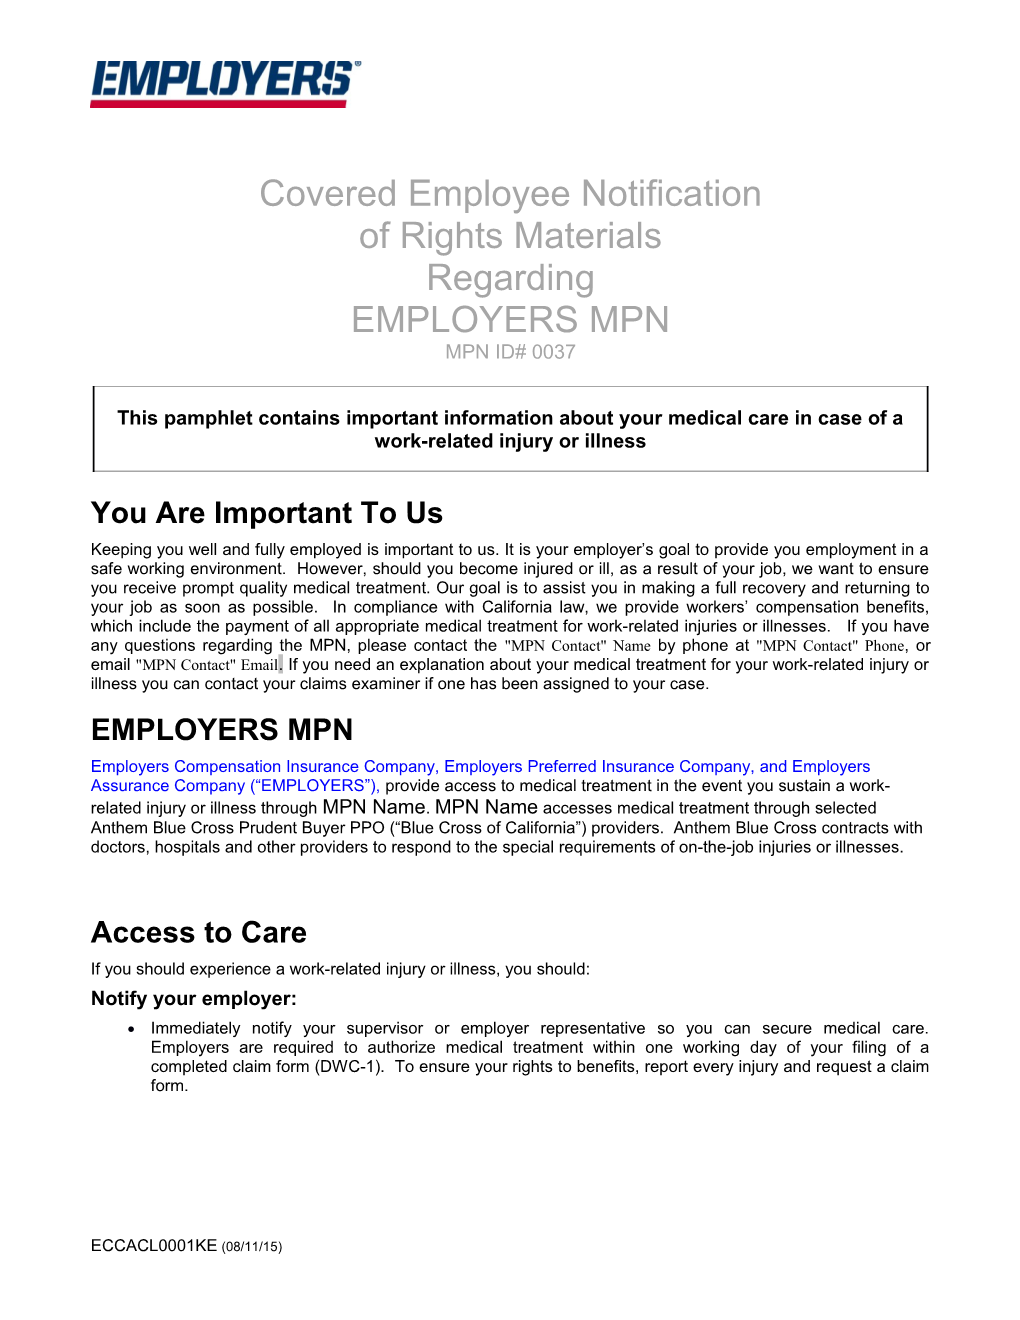 Workers Compensation Claim Form (DWC 1) & Notice of Potential Eligibility